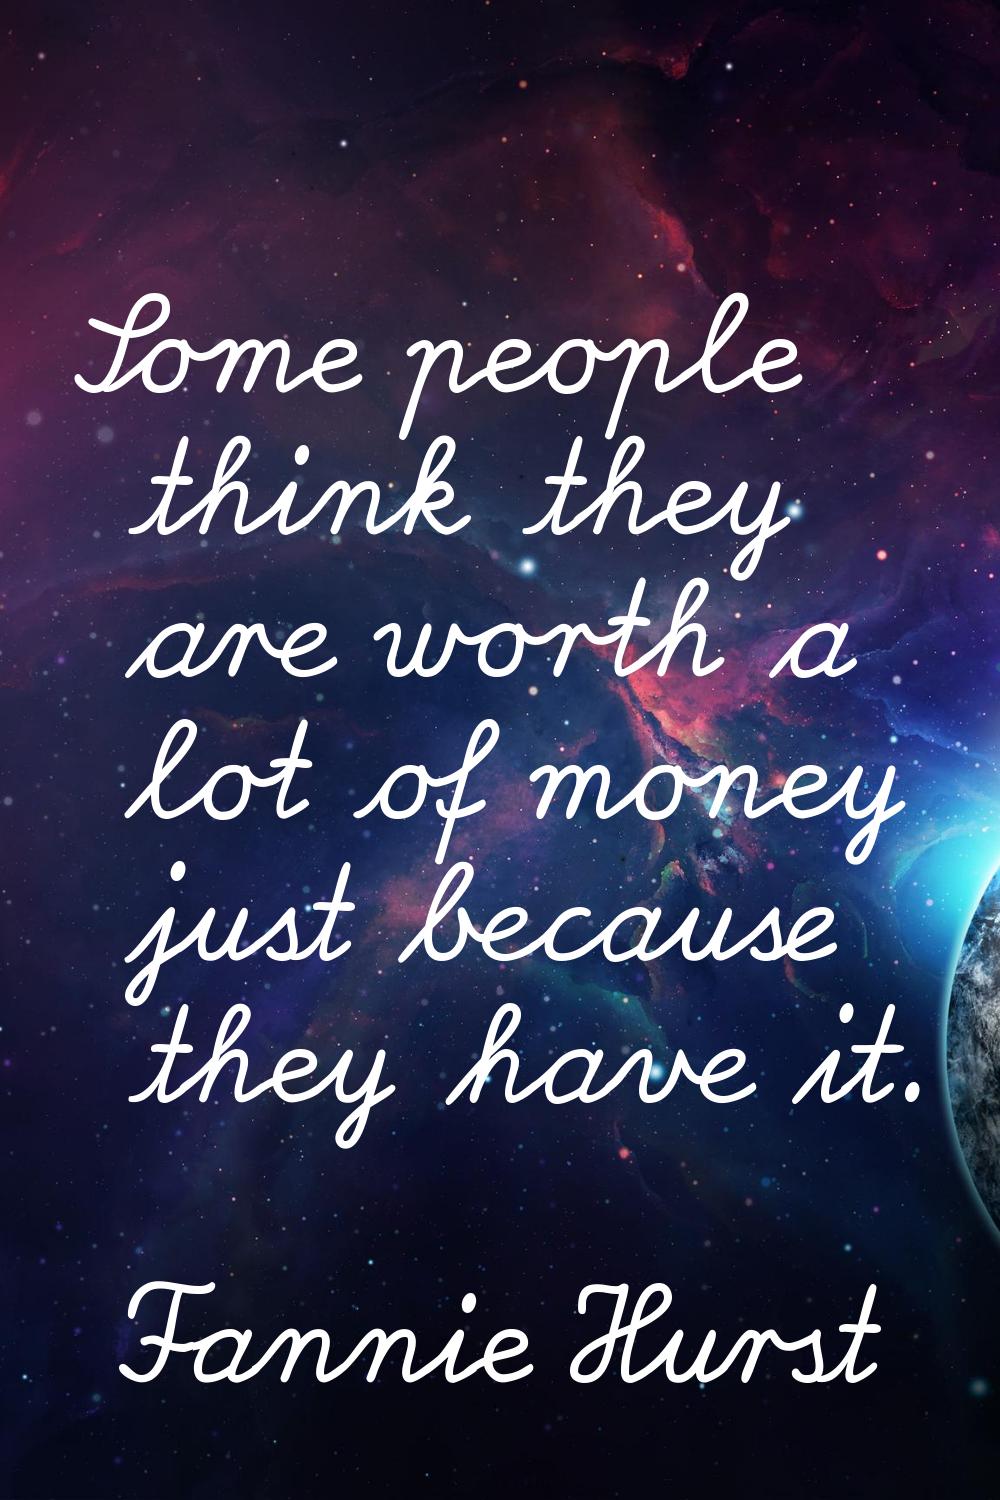 Some people think they are worth a lot of money just because they have it.